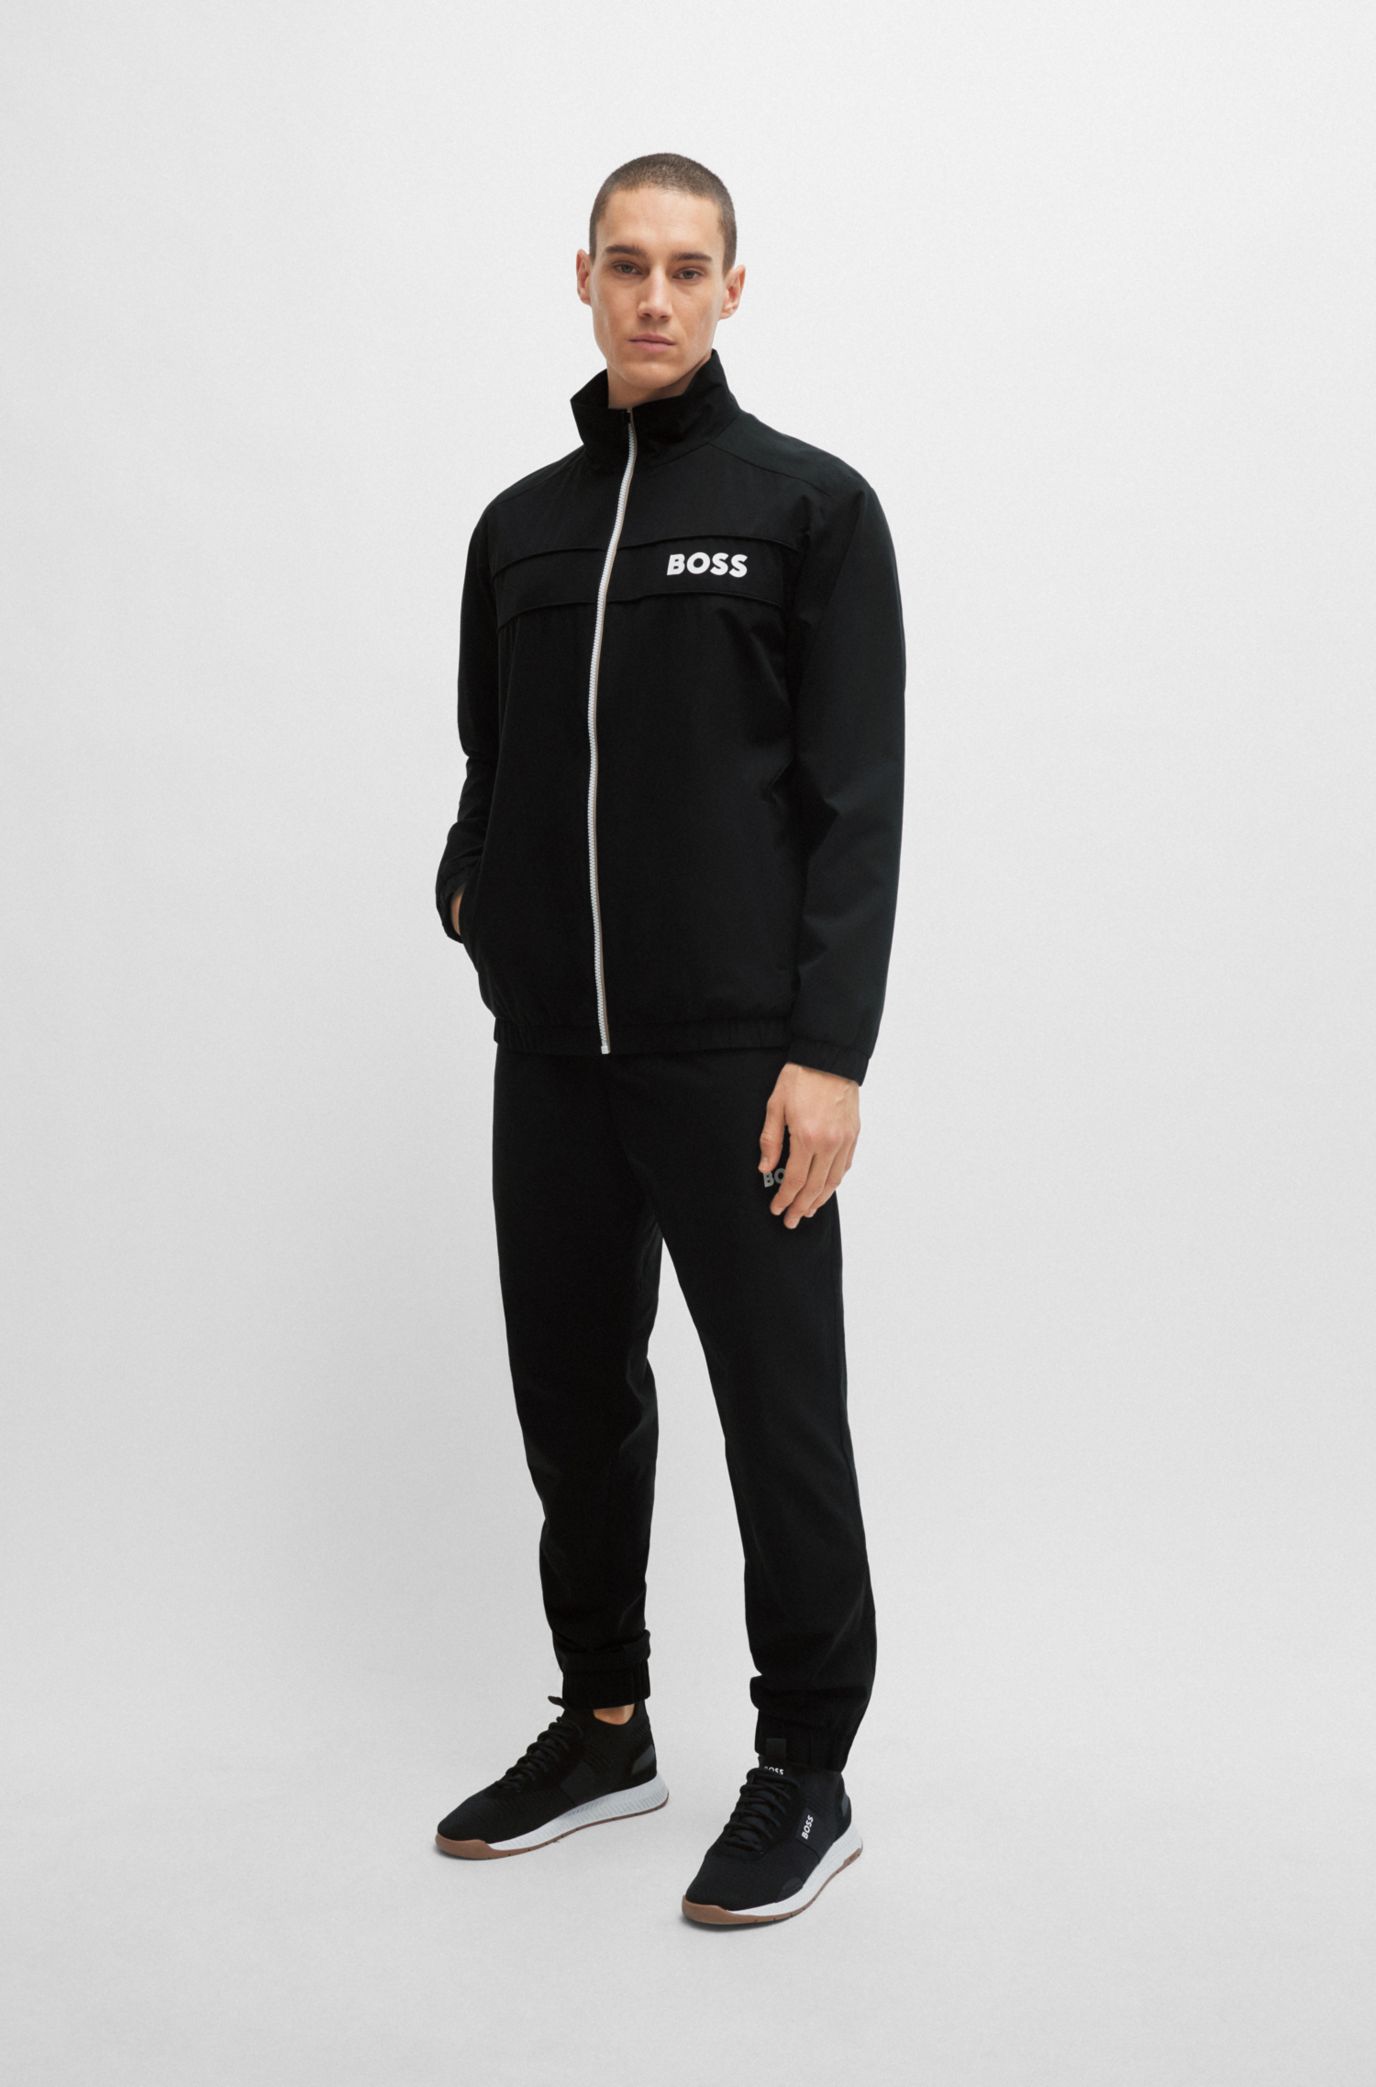 BOSS x MATTEO BERRETTINI water-repellent tracksuit with contrast logos